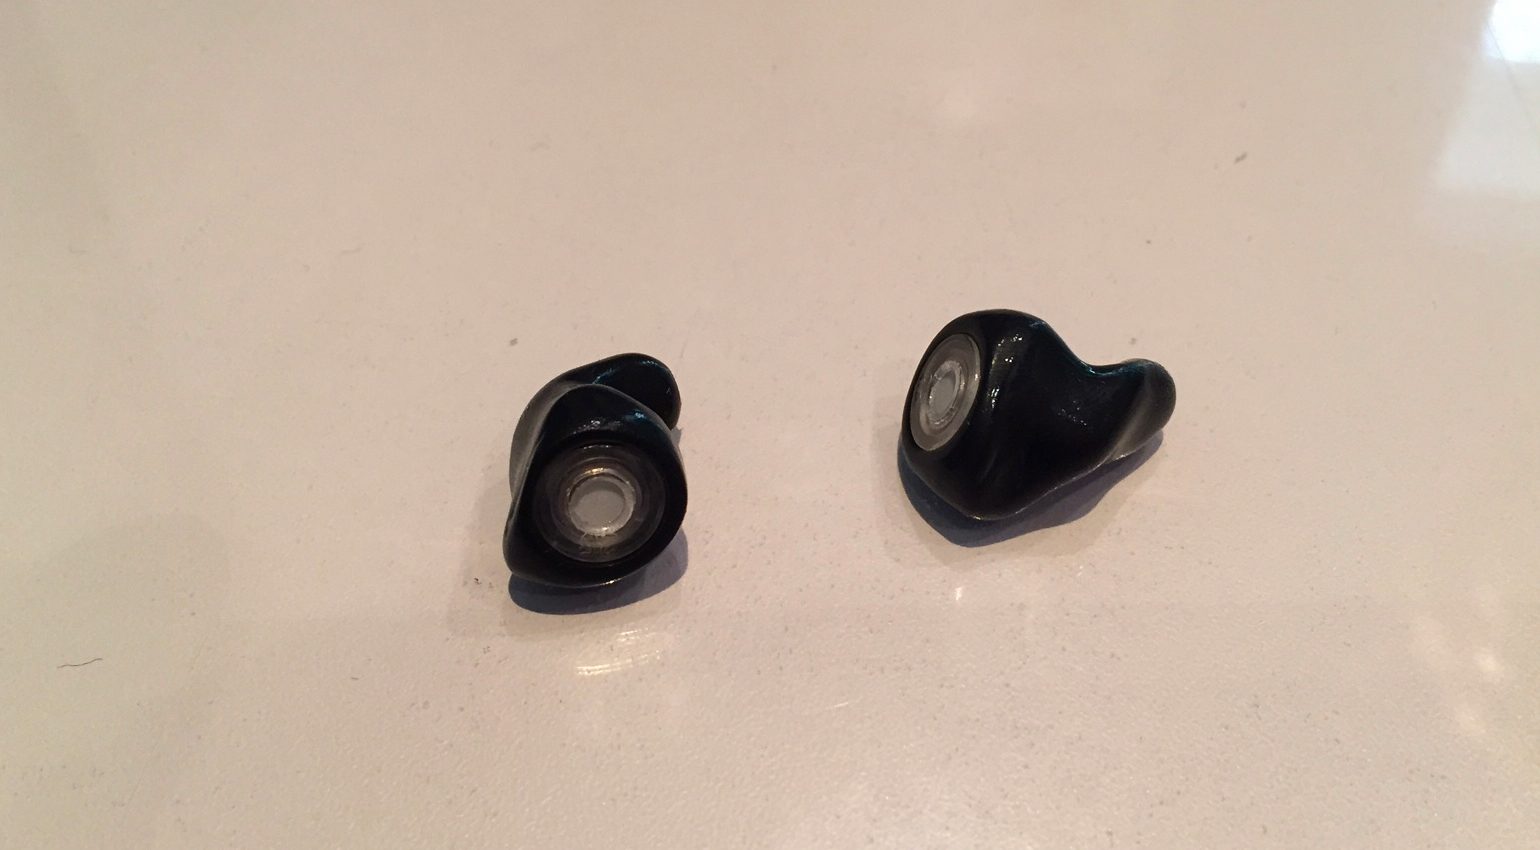 Custom-molded earplugs for musicians with filters